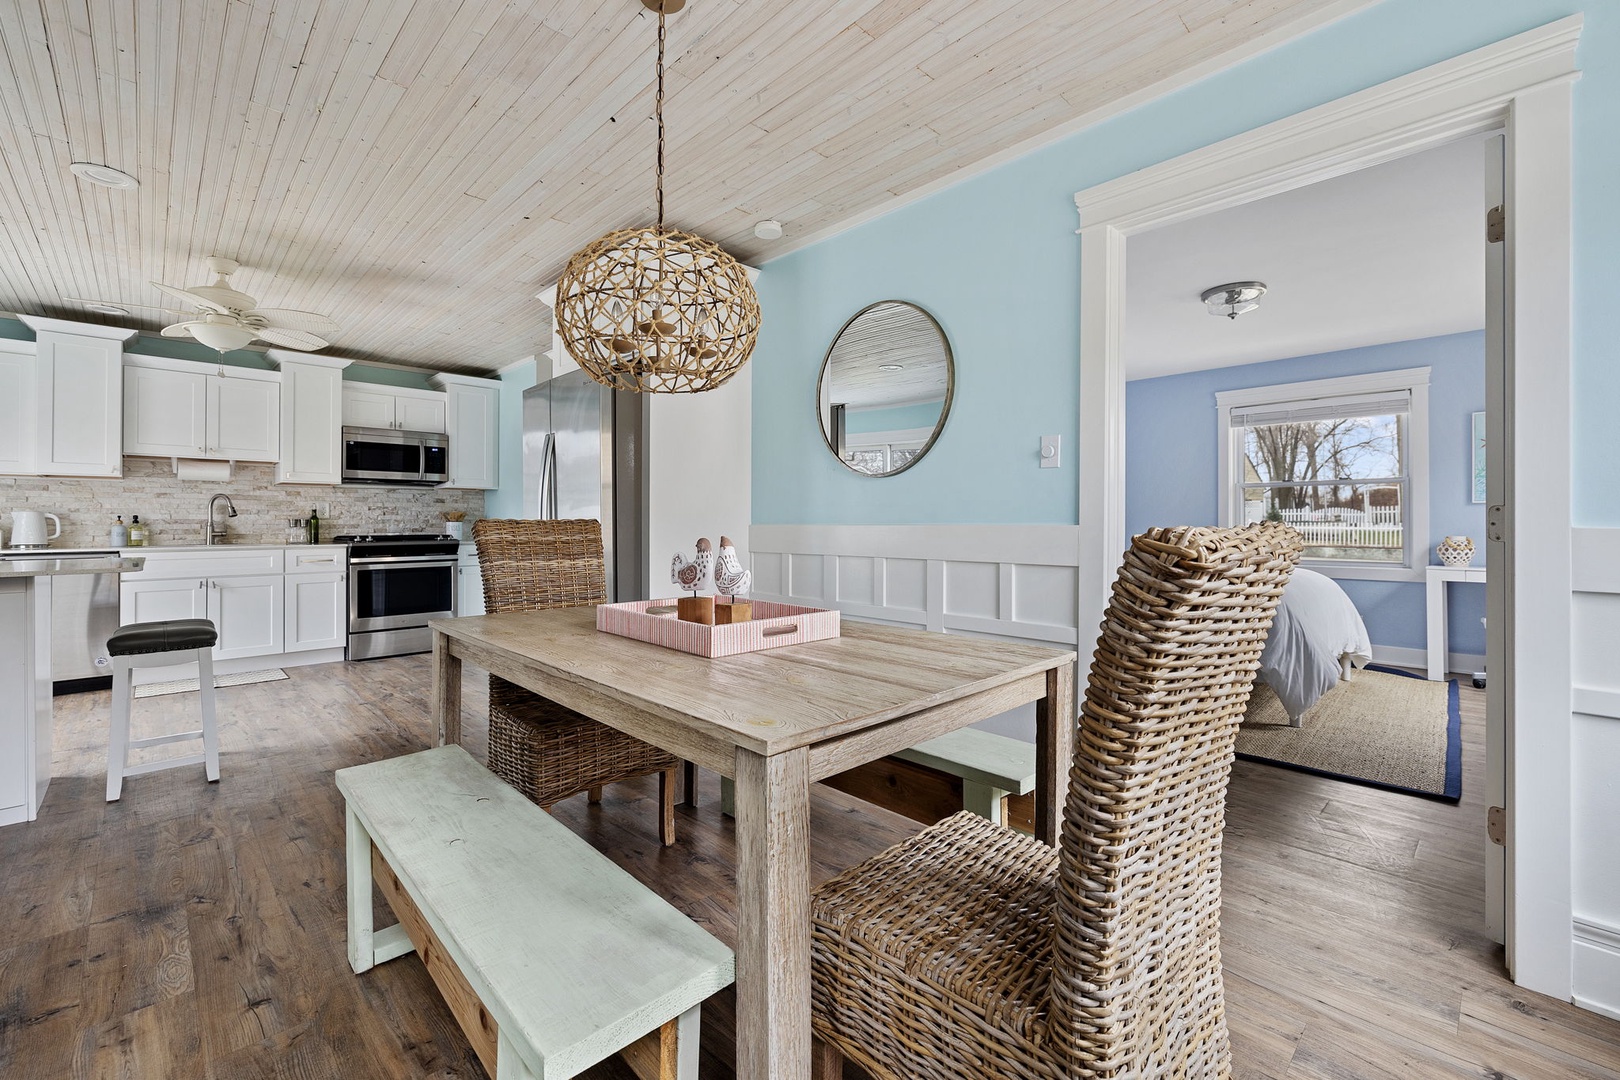 The open design of the kitchen-breakfast nook-dining room provides extra space.